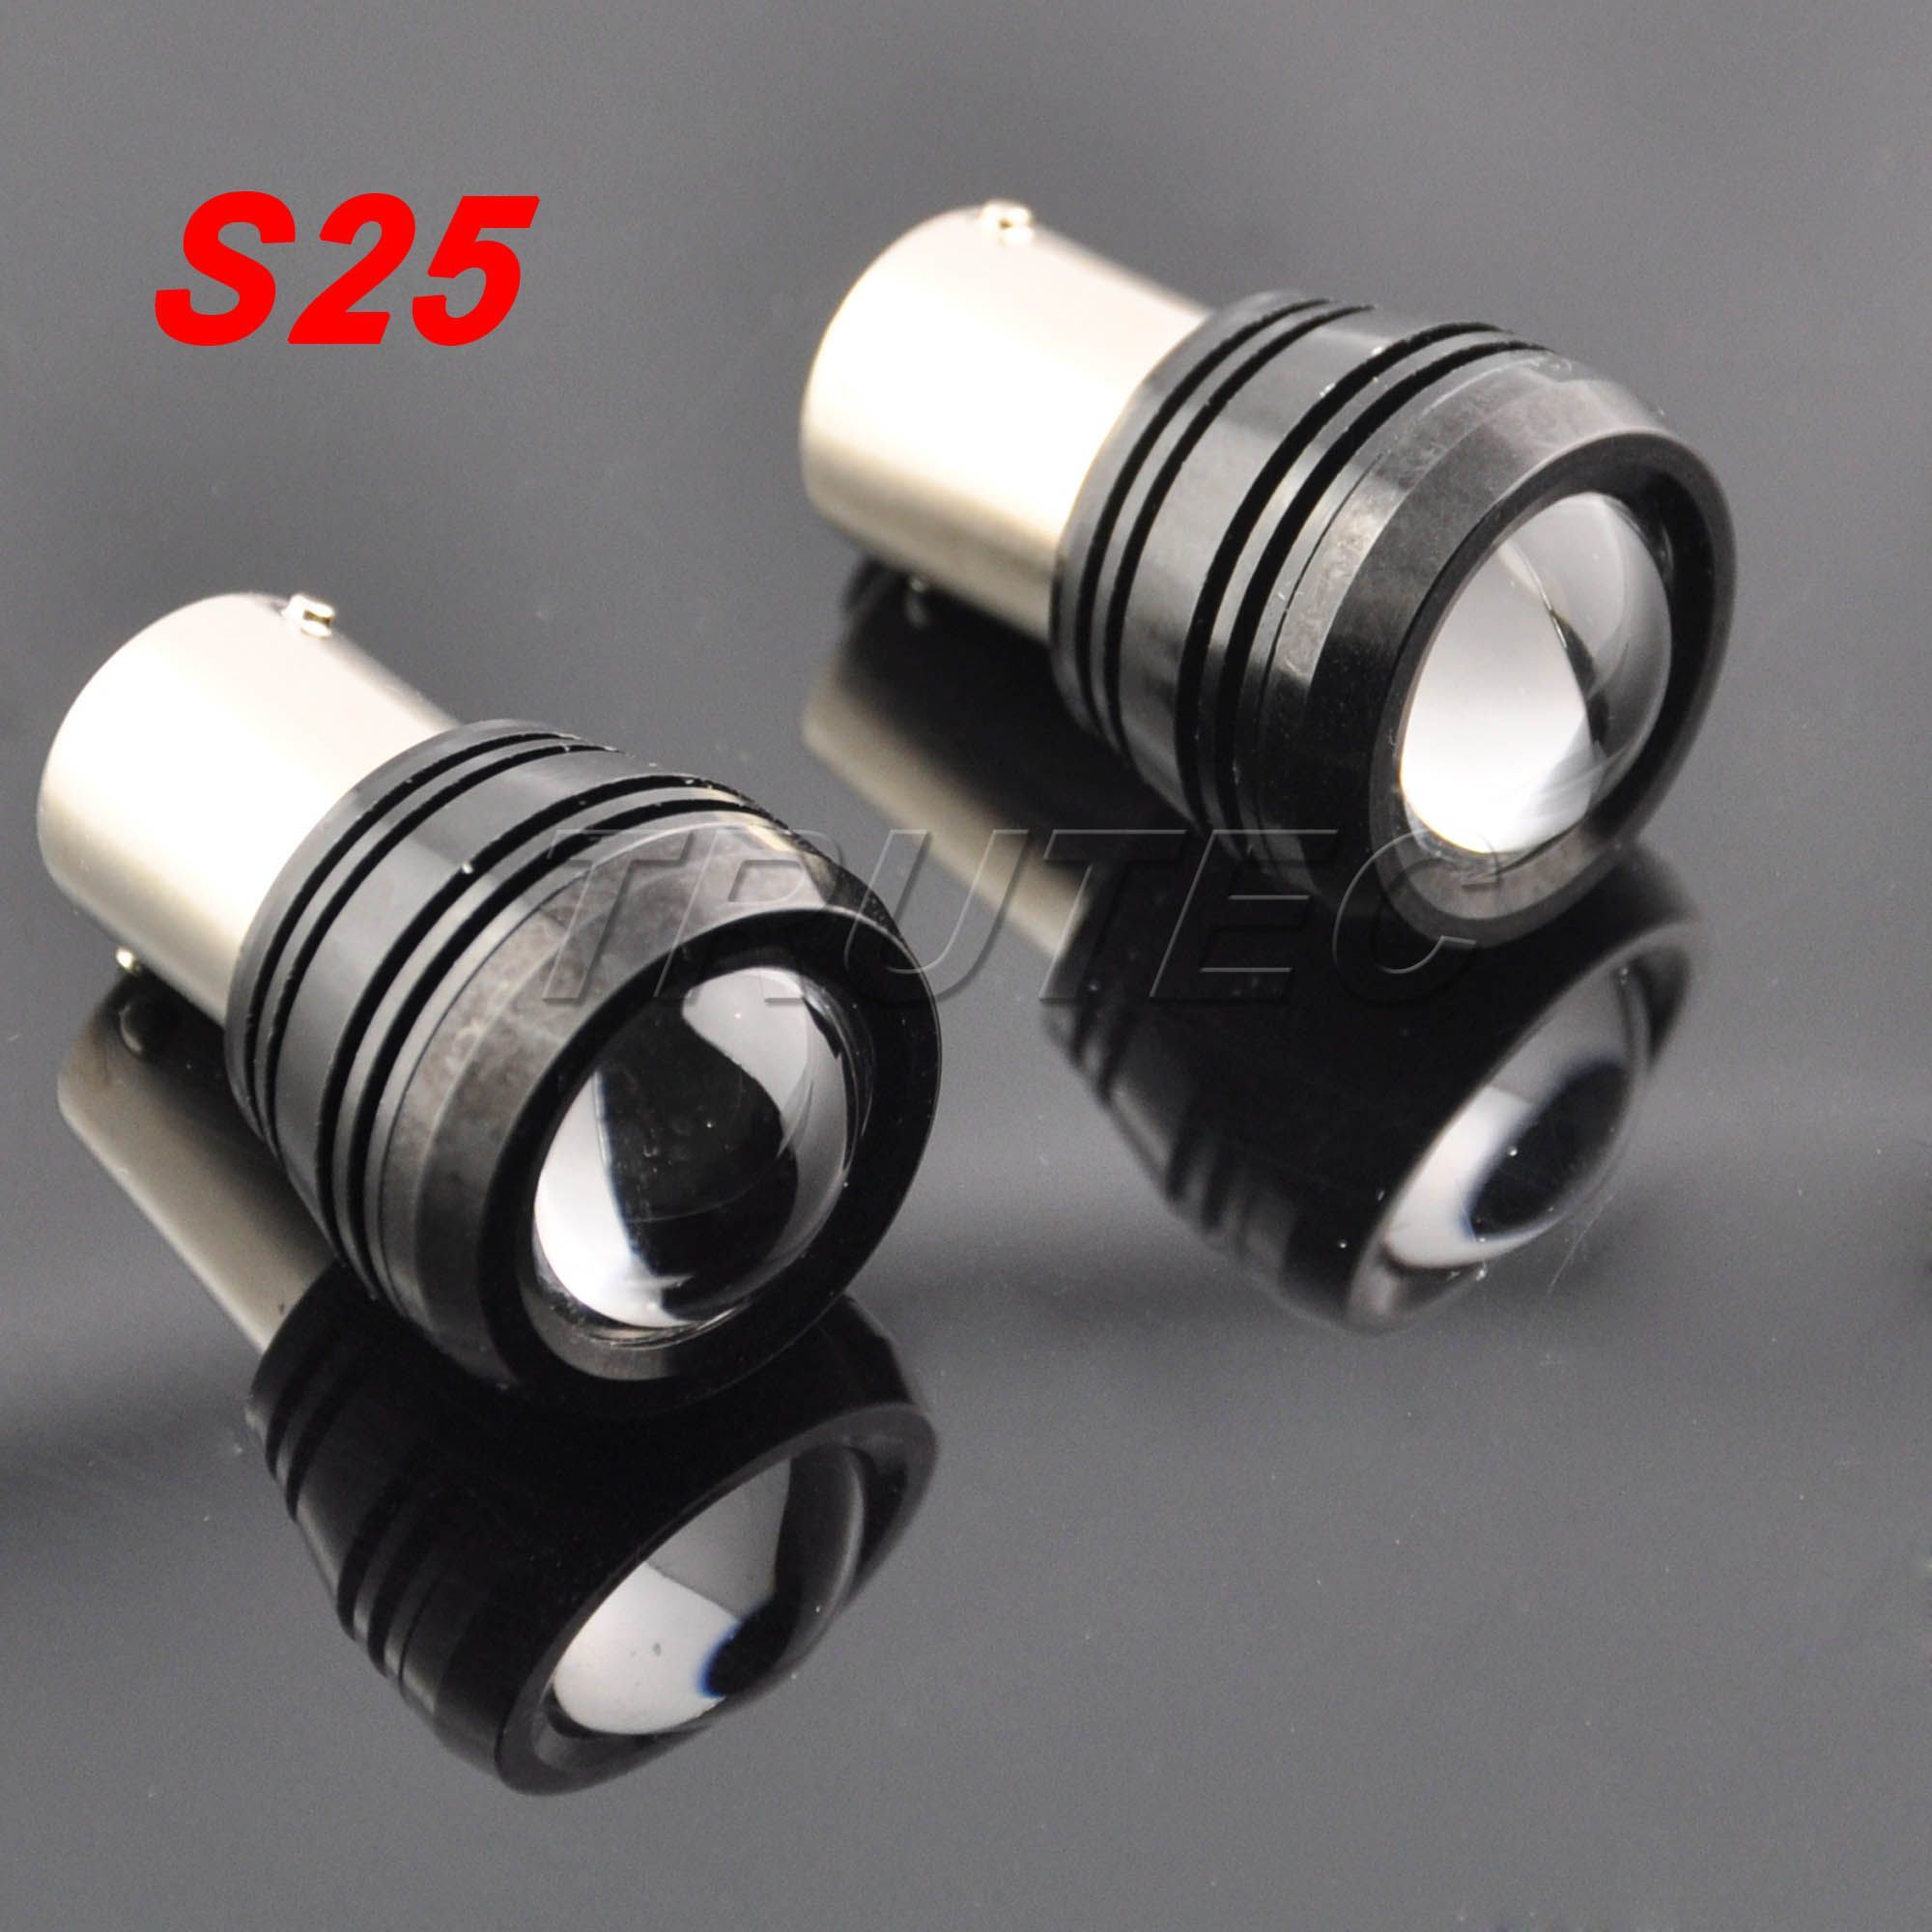 Auto LED Lights (S25 -3W Projector Lens)